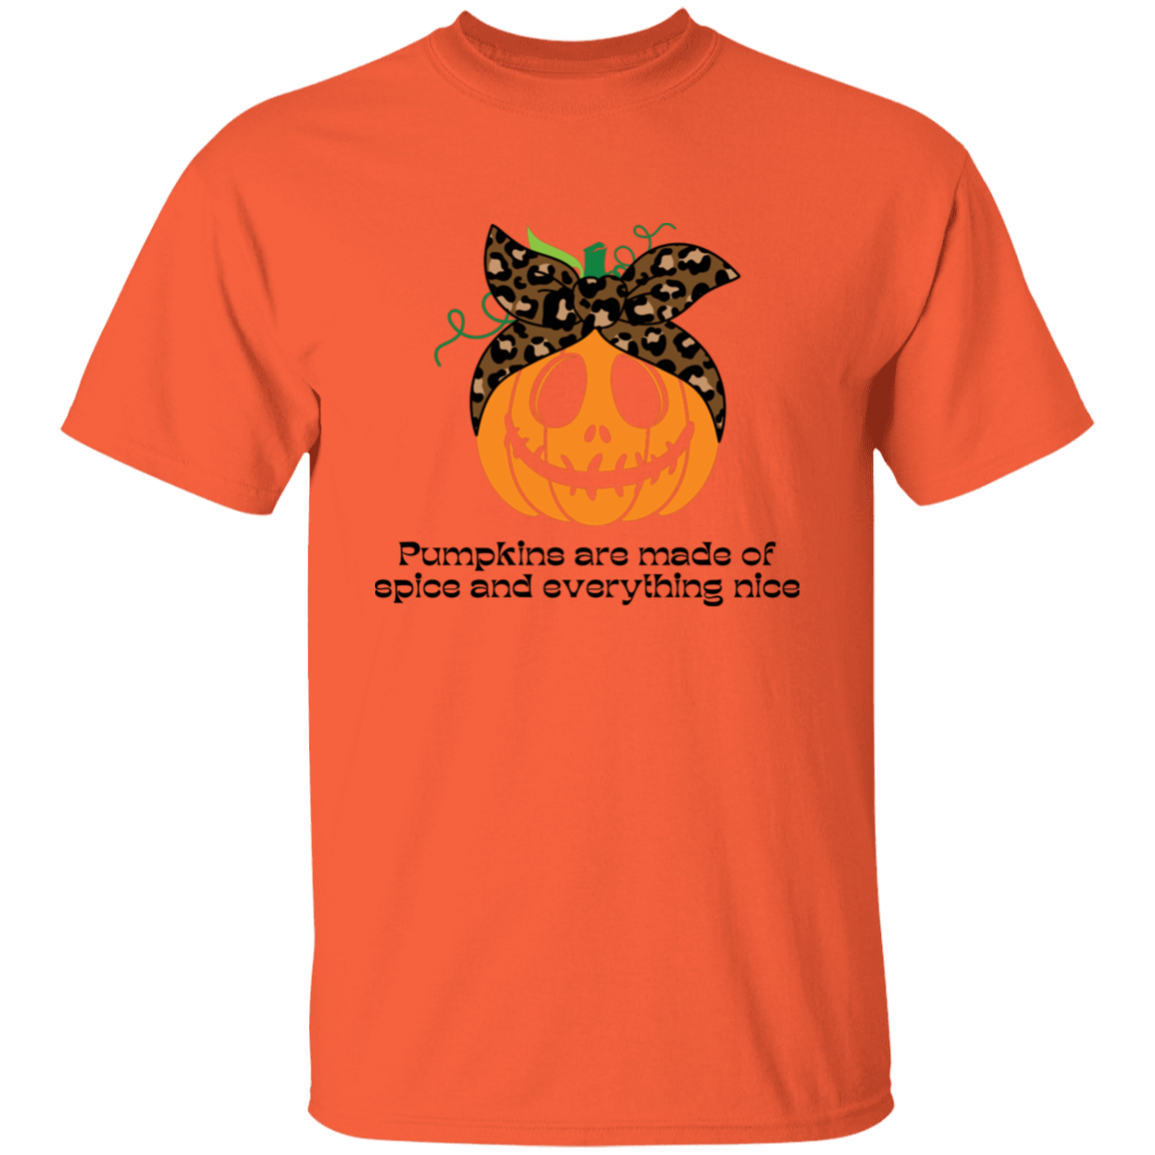 Pumpkins are made of spice and everything nice G500 5.3 oz. T-Shirt